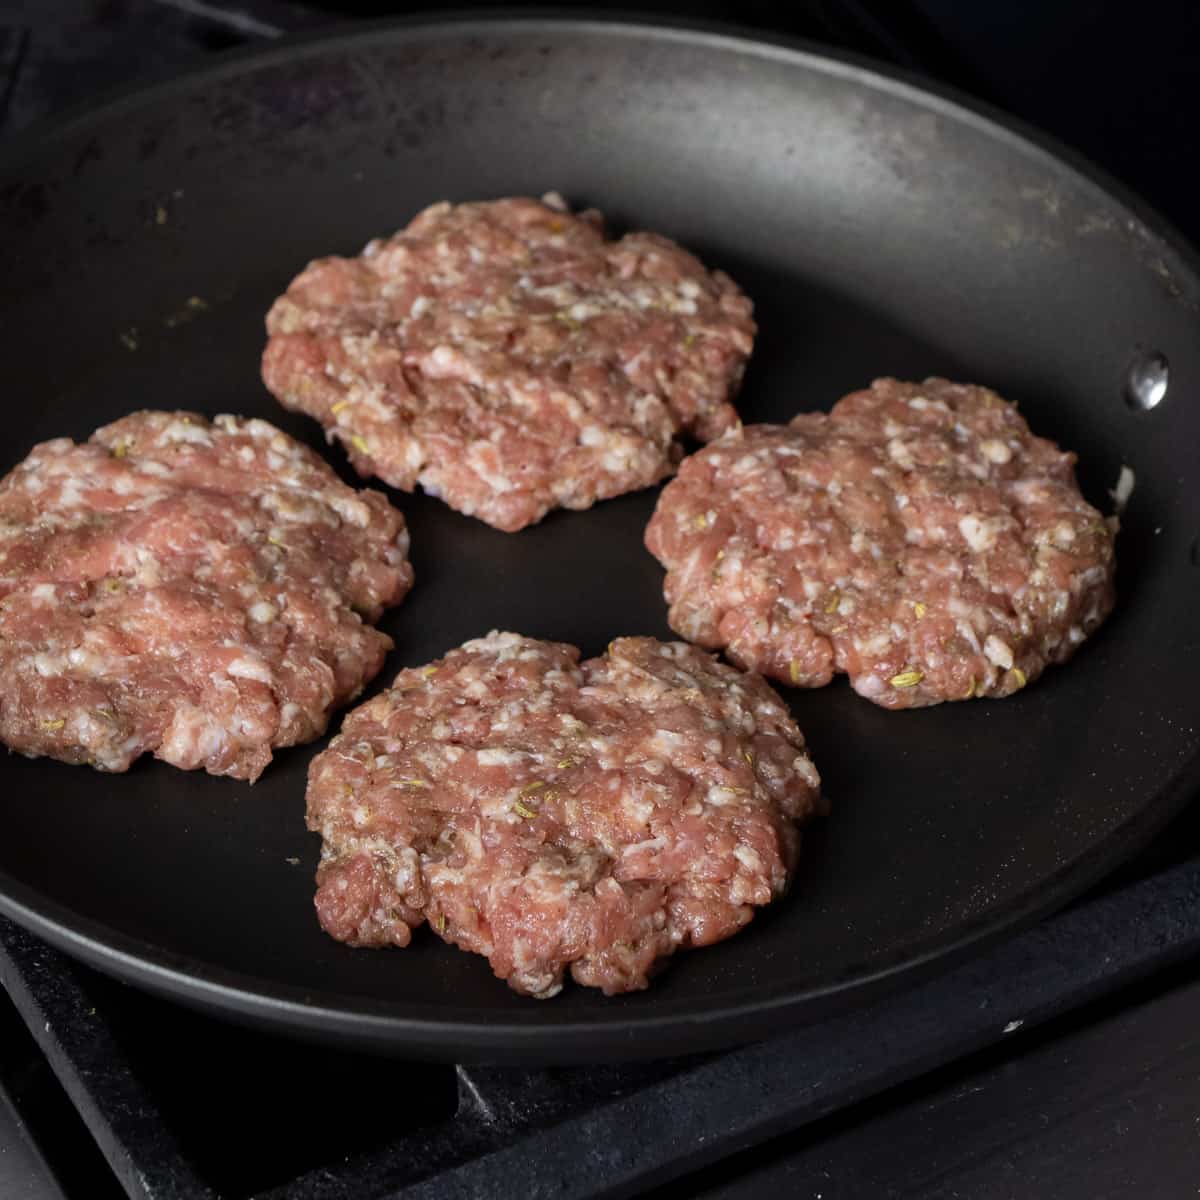 Raw sausage patties in a skillet.